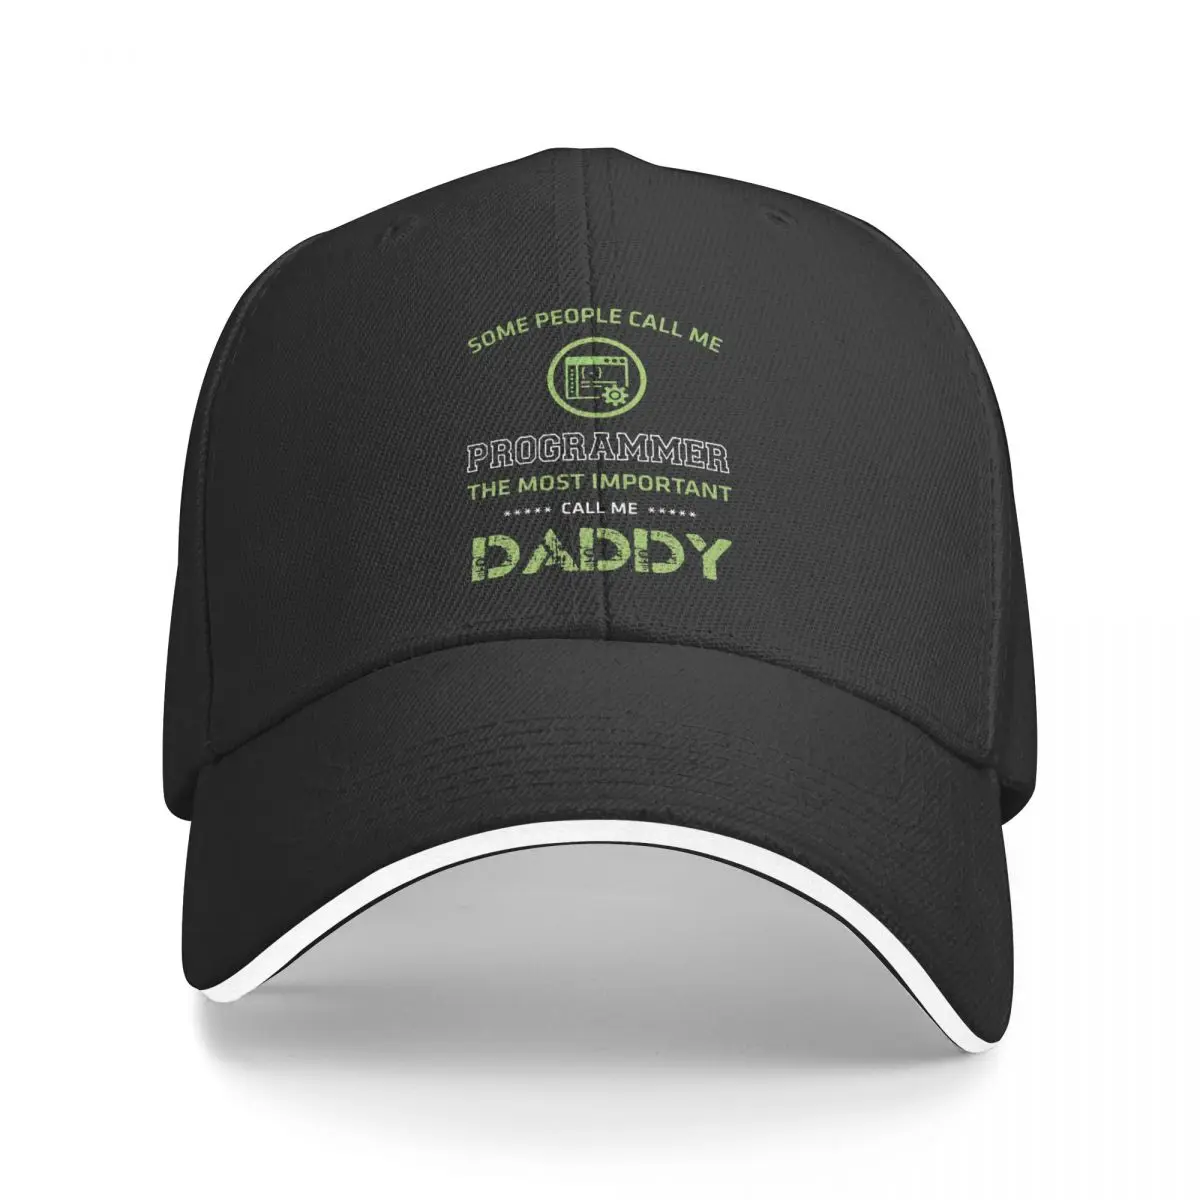 

Call M Daddy Software Developer Coder IT Programmer Geek Multicolor Hat Peaked Women's Cap Personalized Visor Cycling Hats